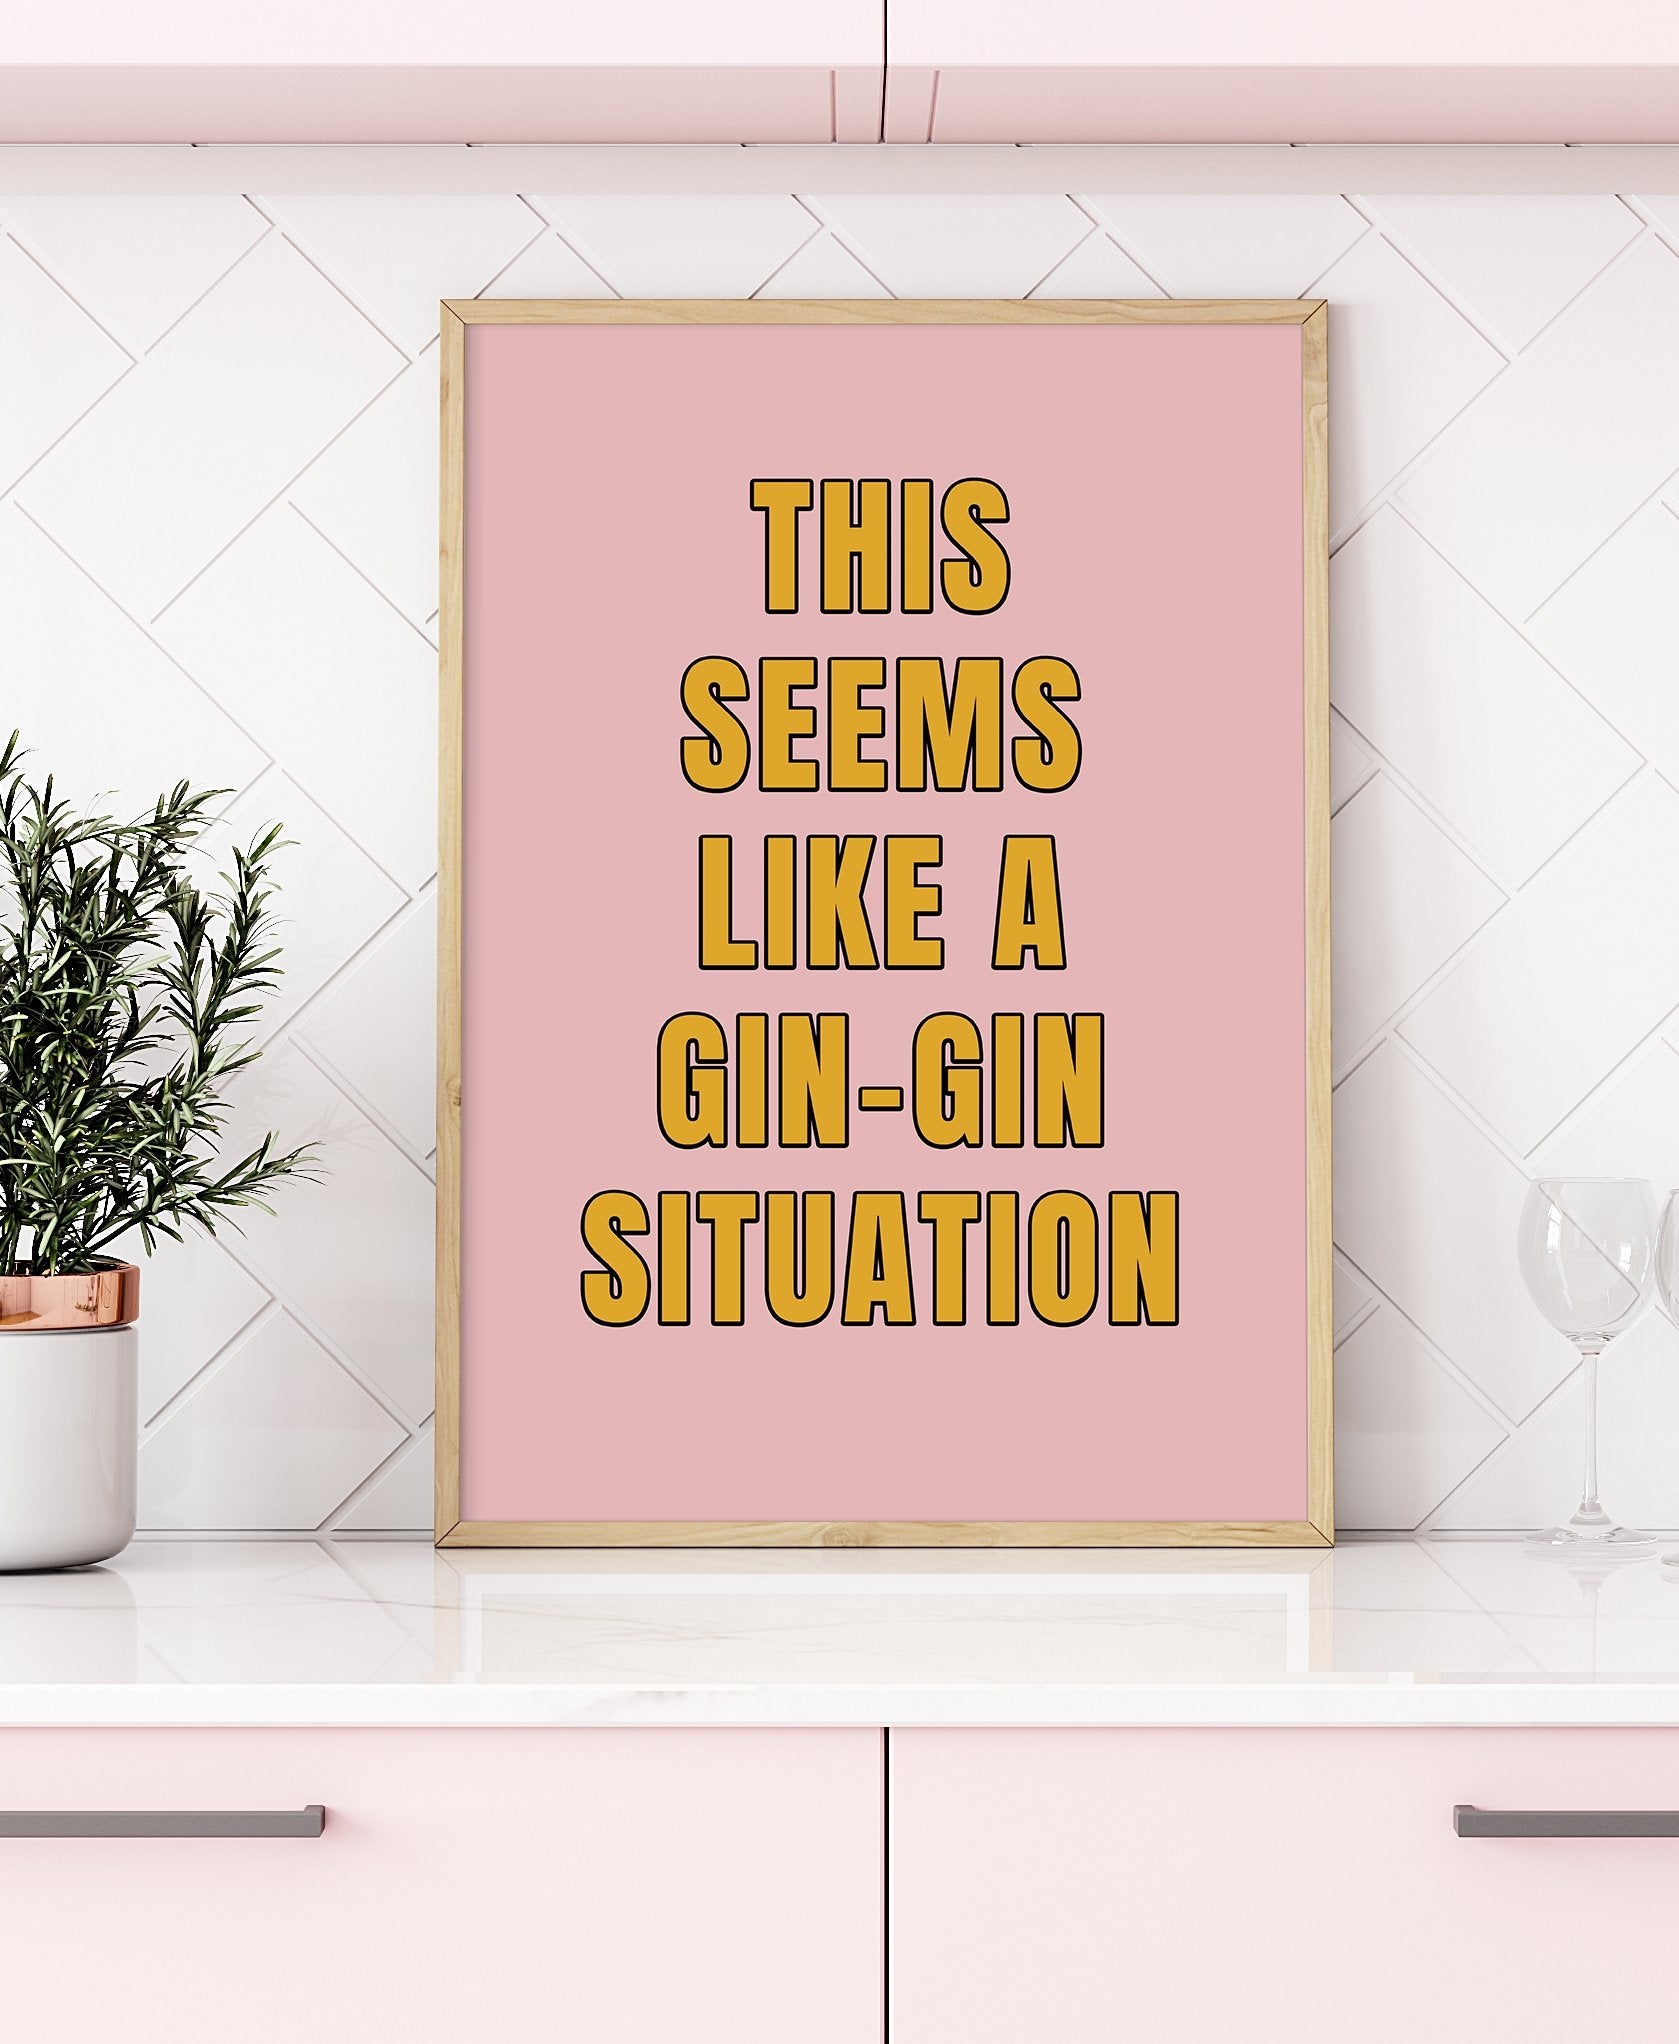 Gin Quote Print